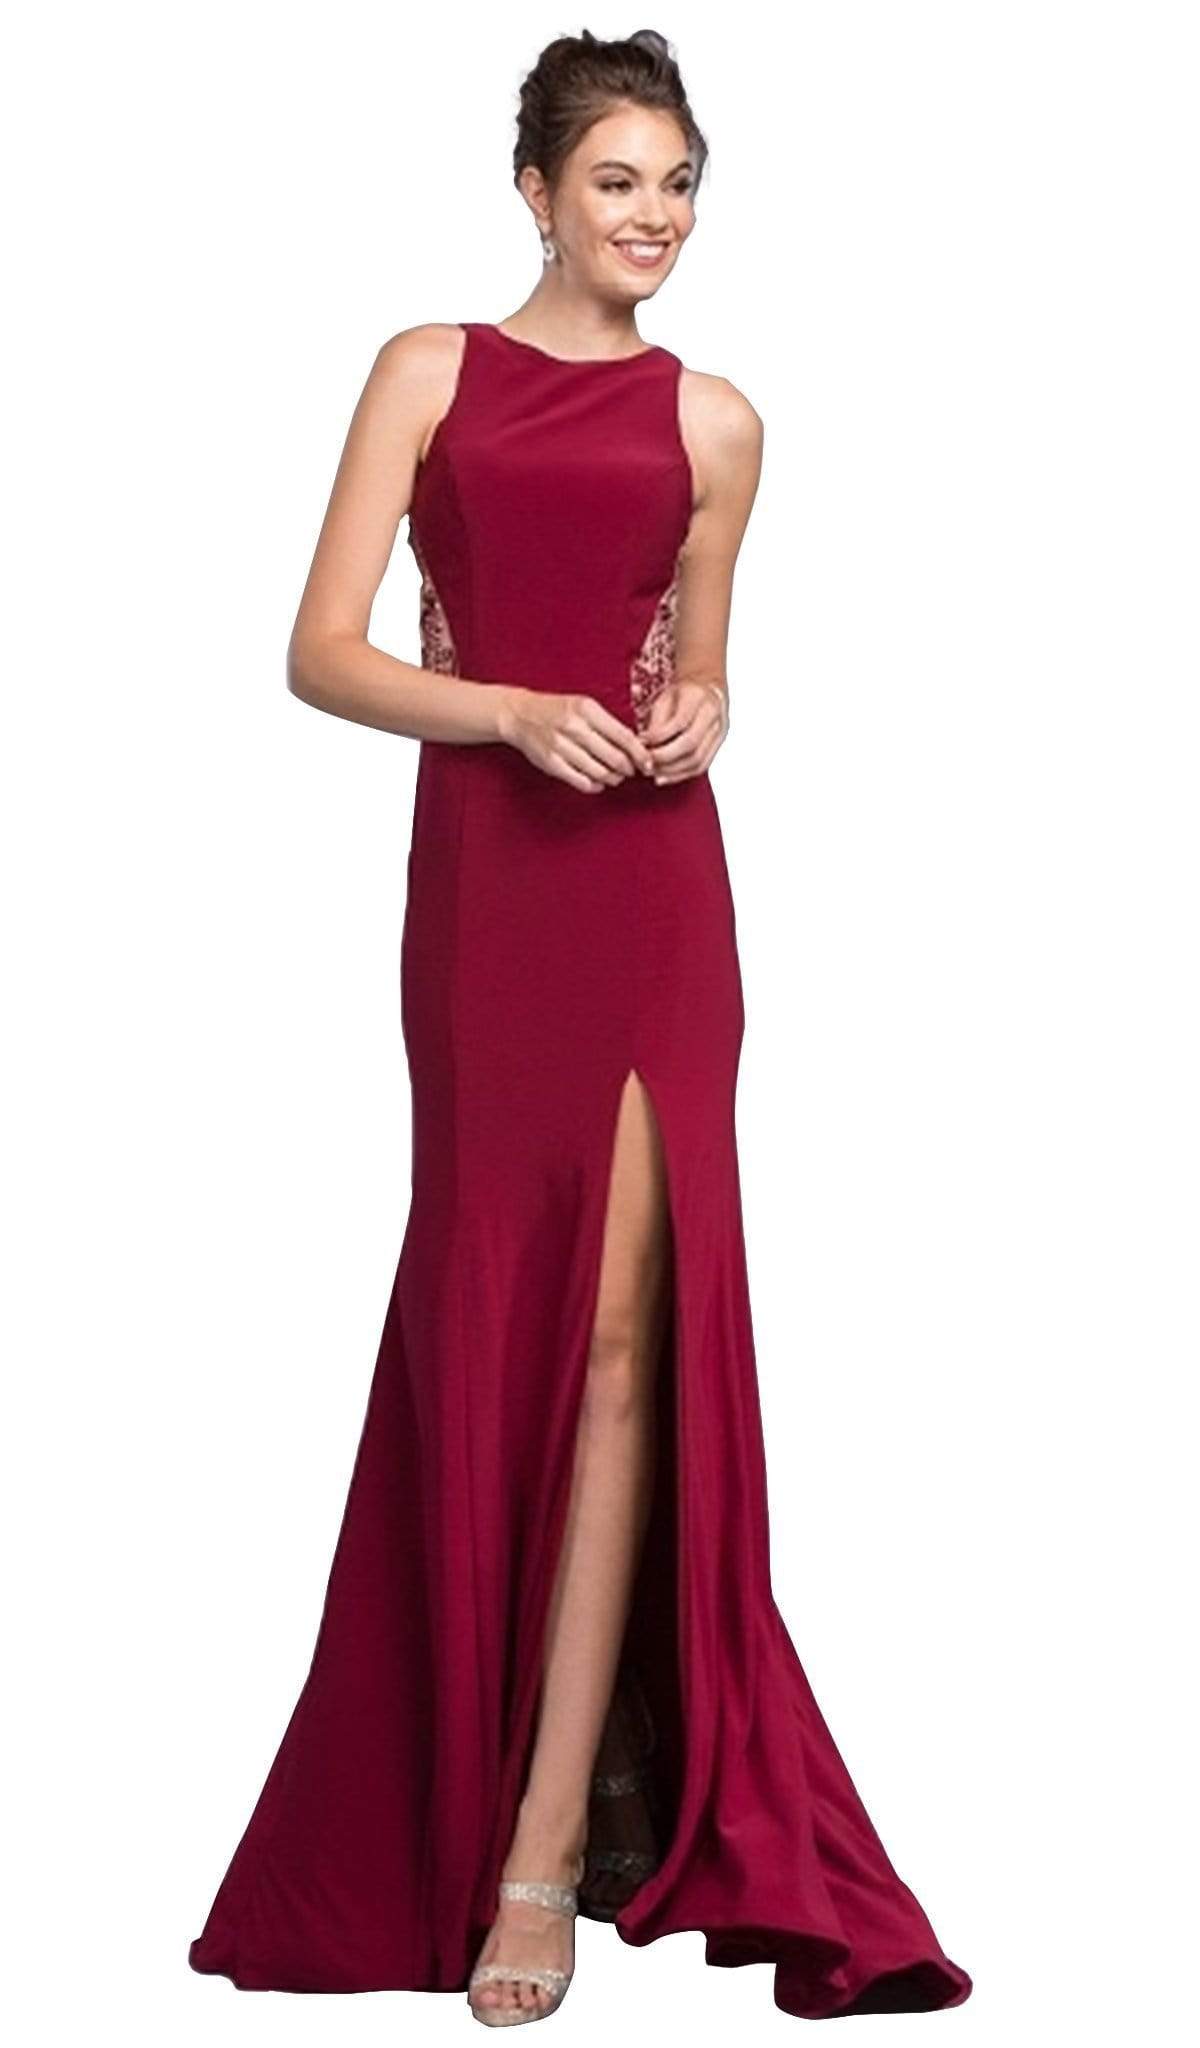 Aspeed Design, Aspeed Design - Bedazzled Bateau Fitted Prom Dress